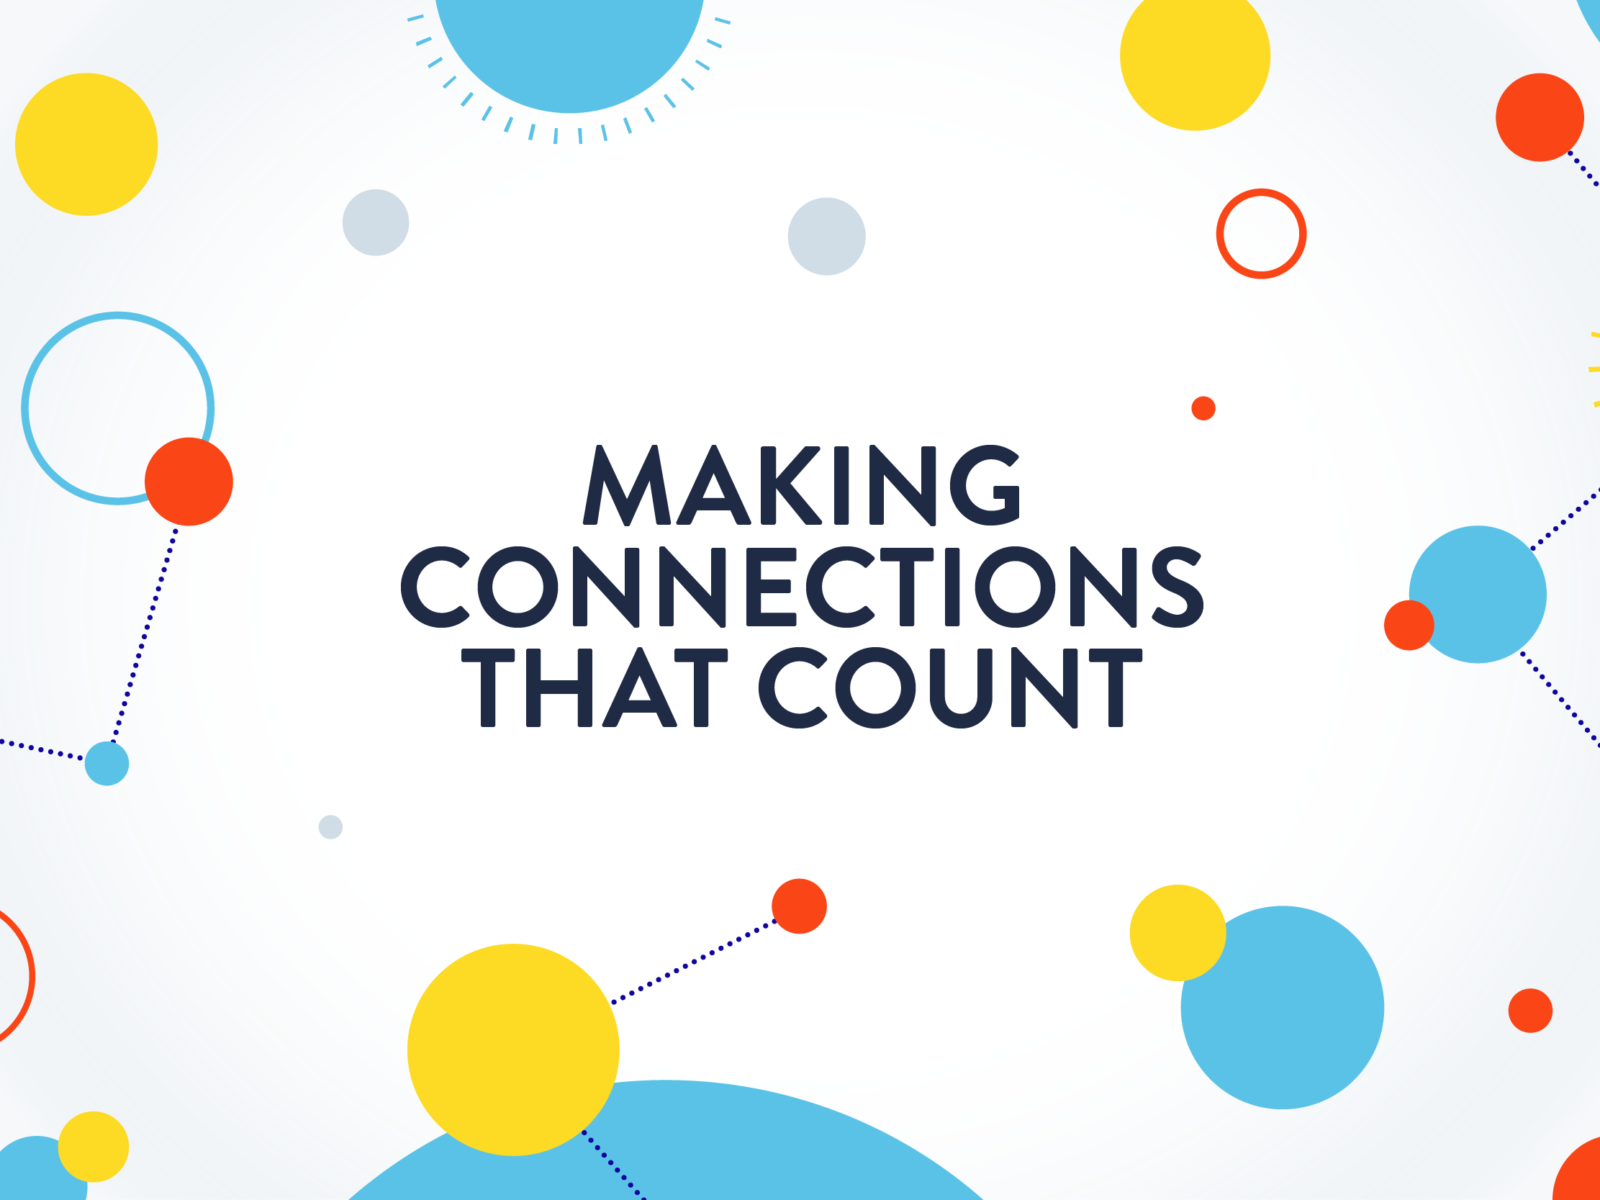 Making connections that count